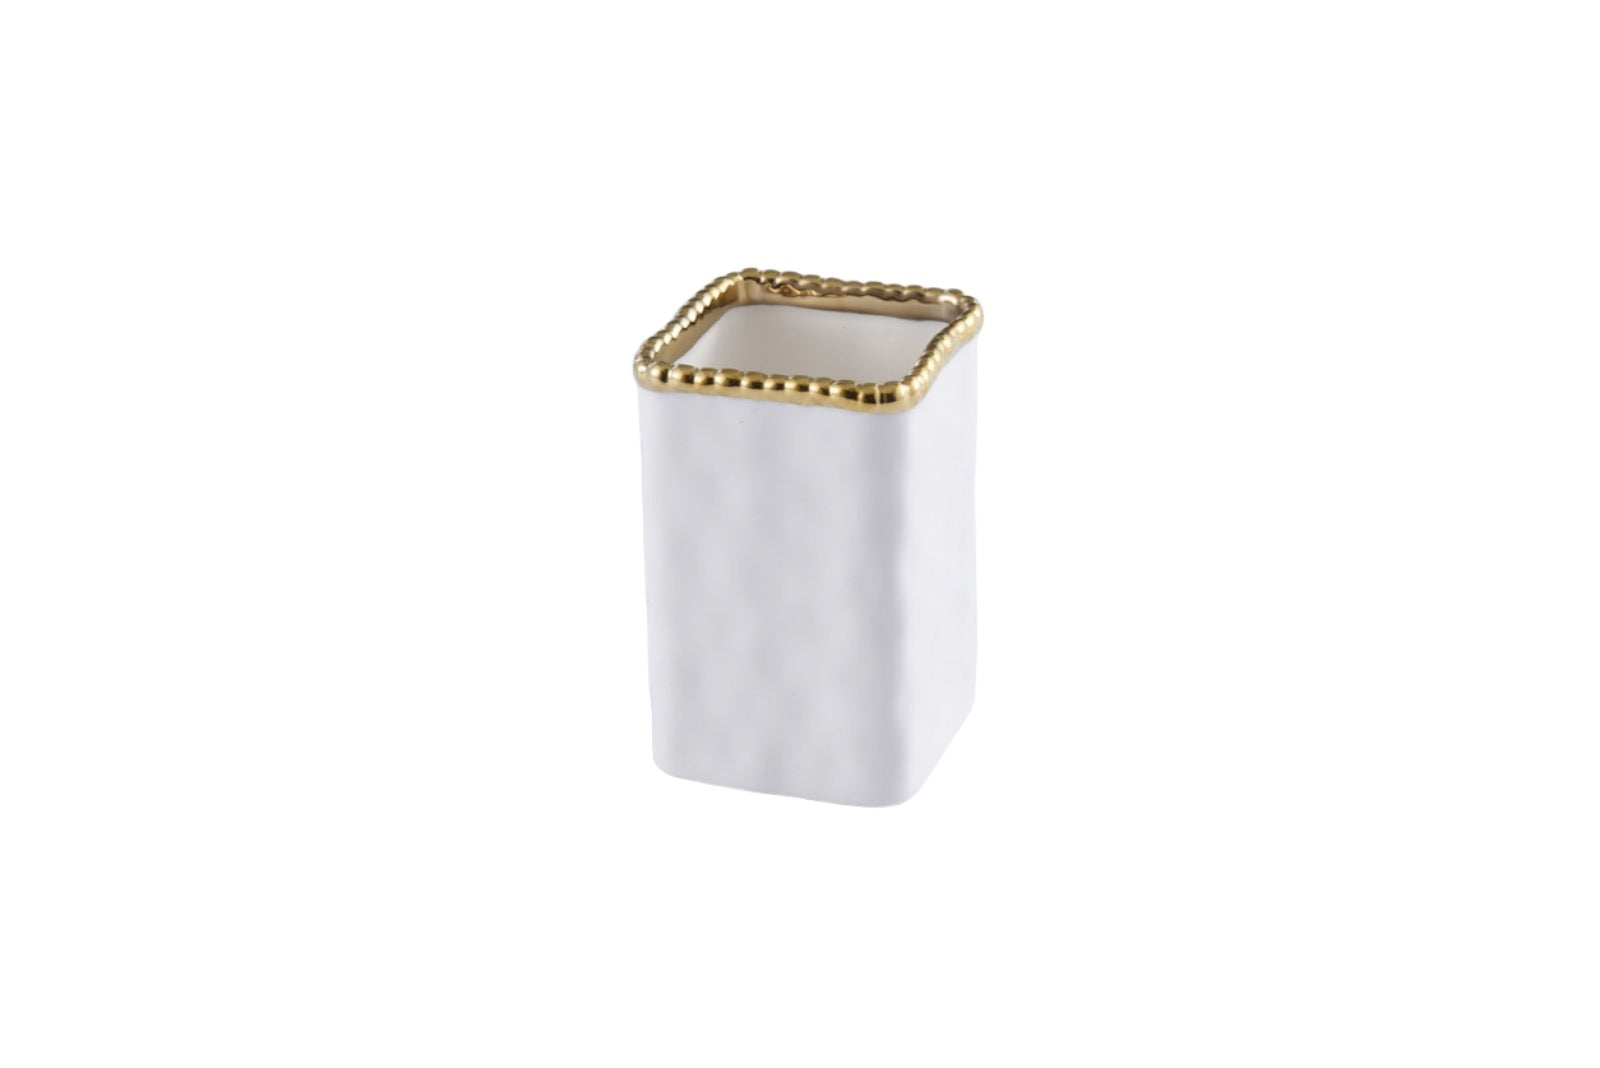 Pampa Bay Toothbrush Holder With Gold Beads